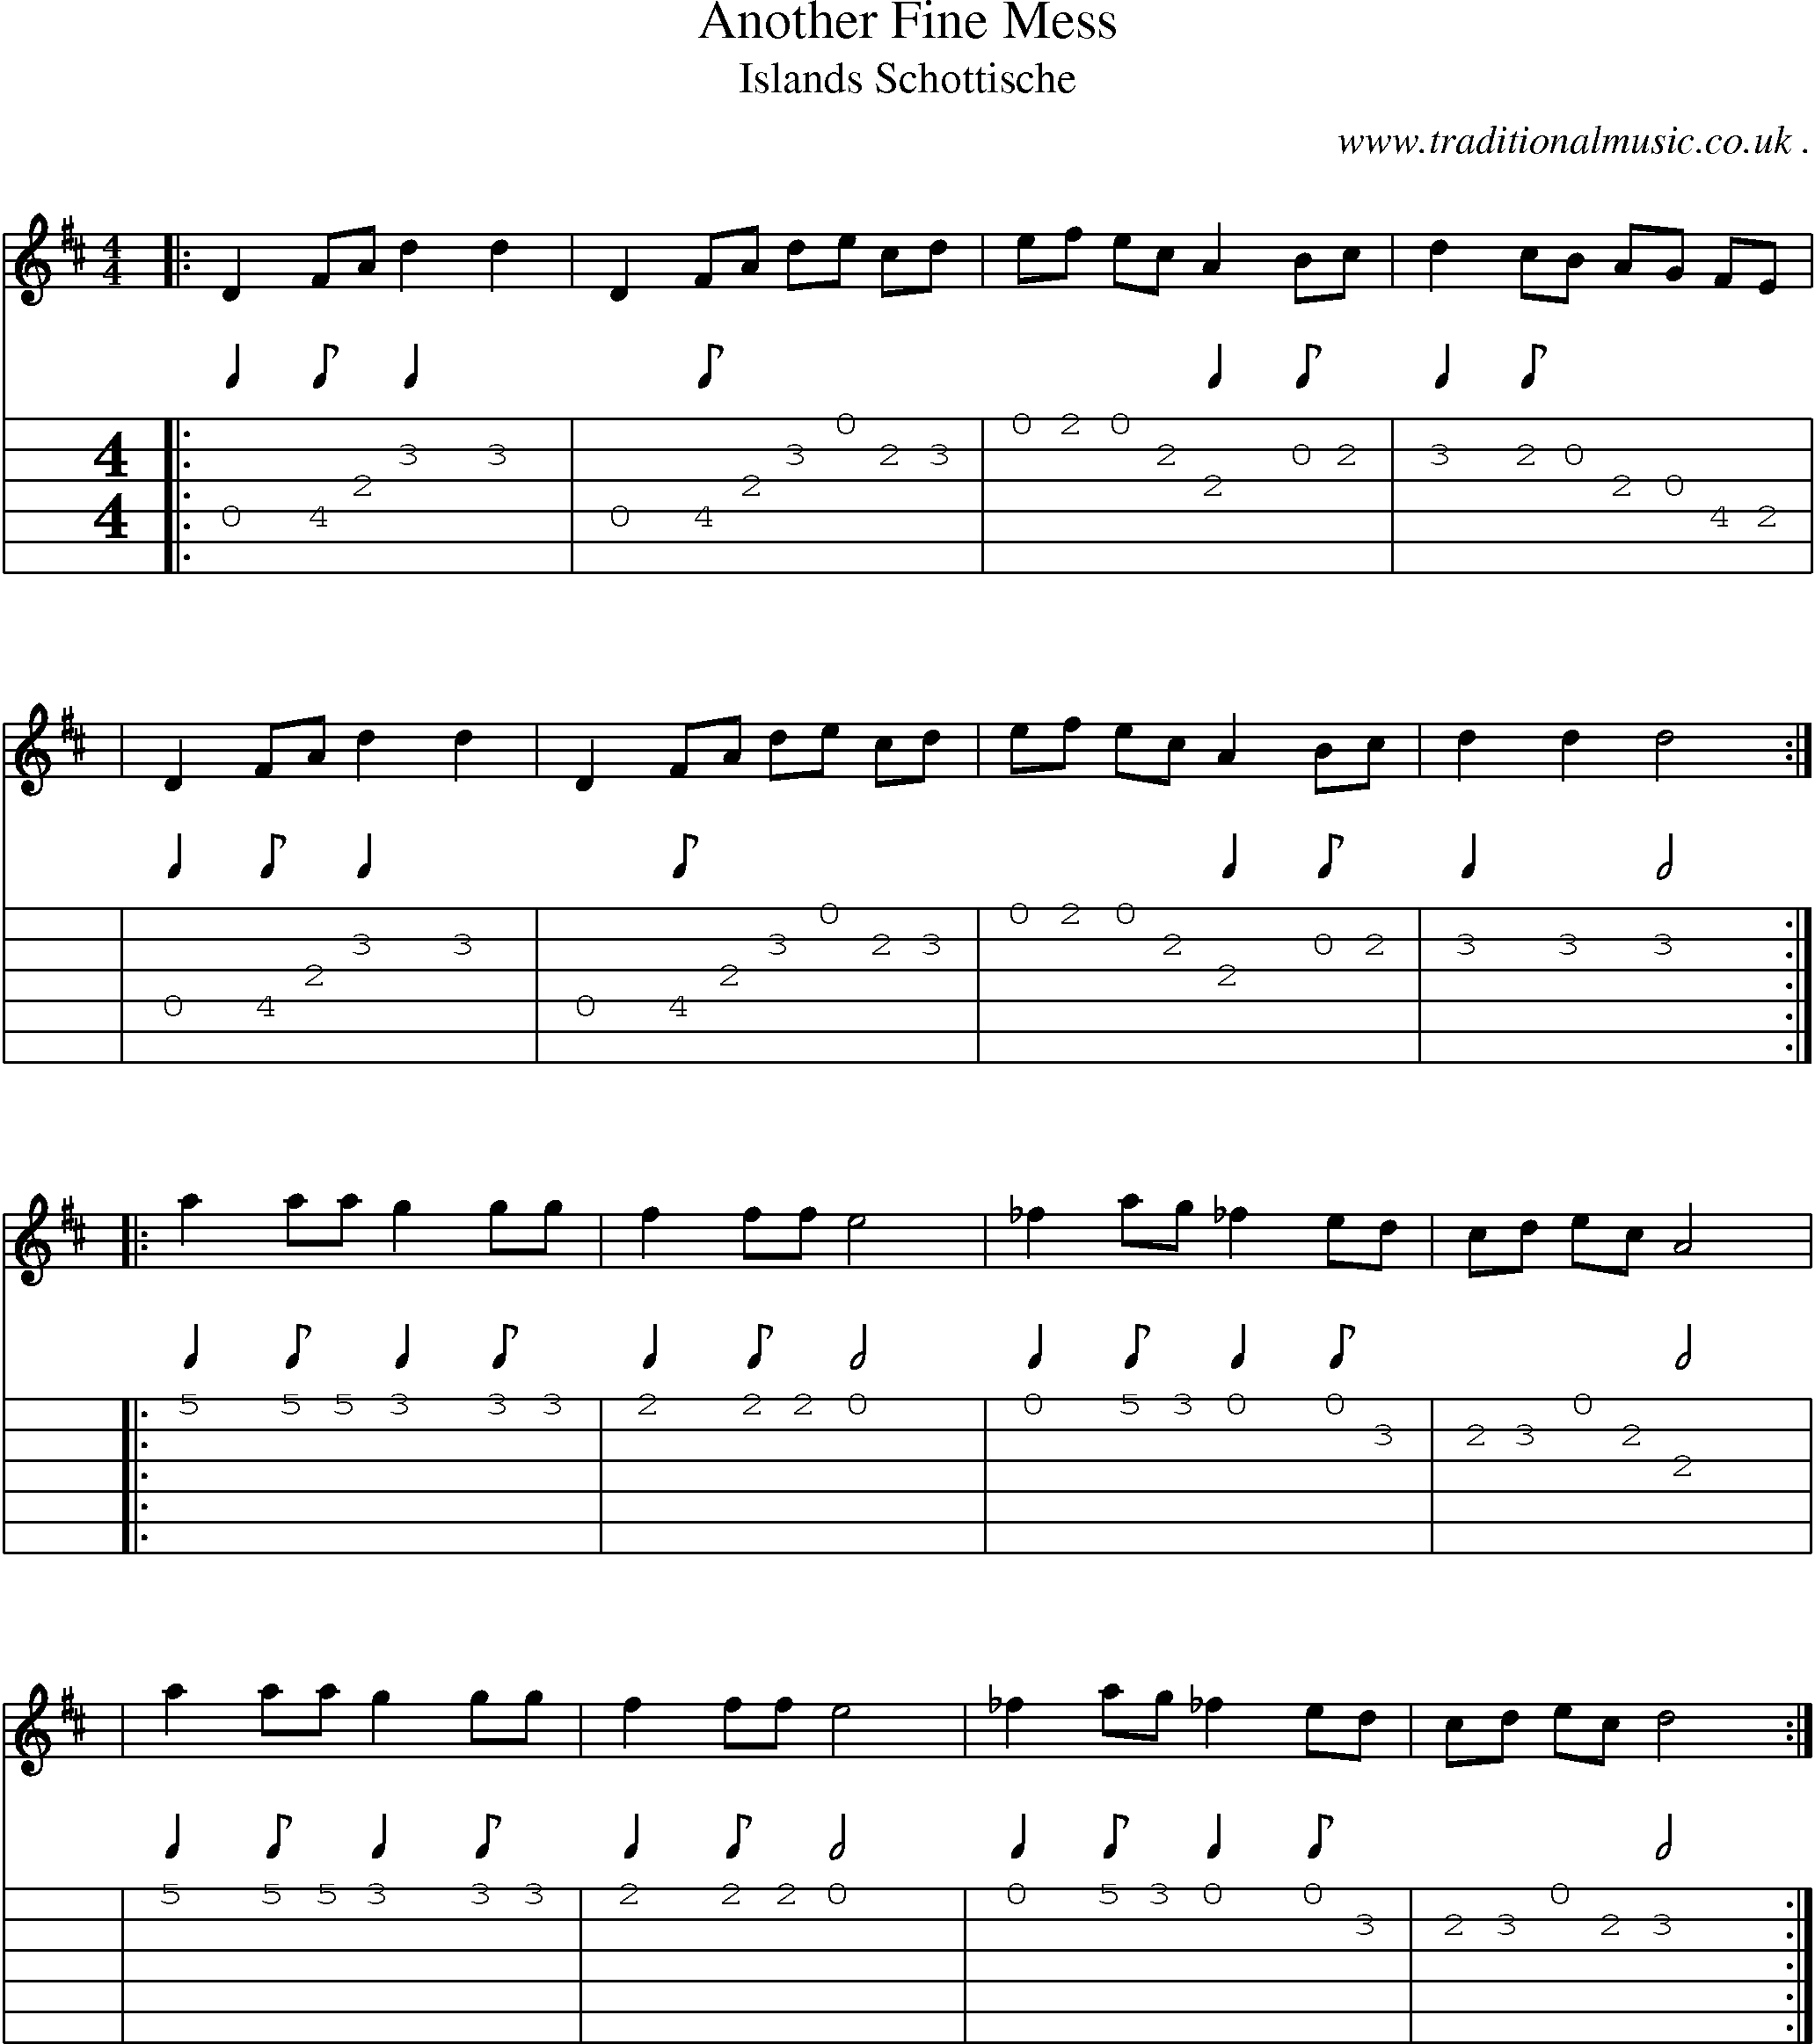 Sheet-Music and Guitar Tabs for Another Fine Mess